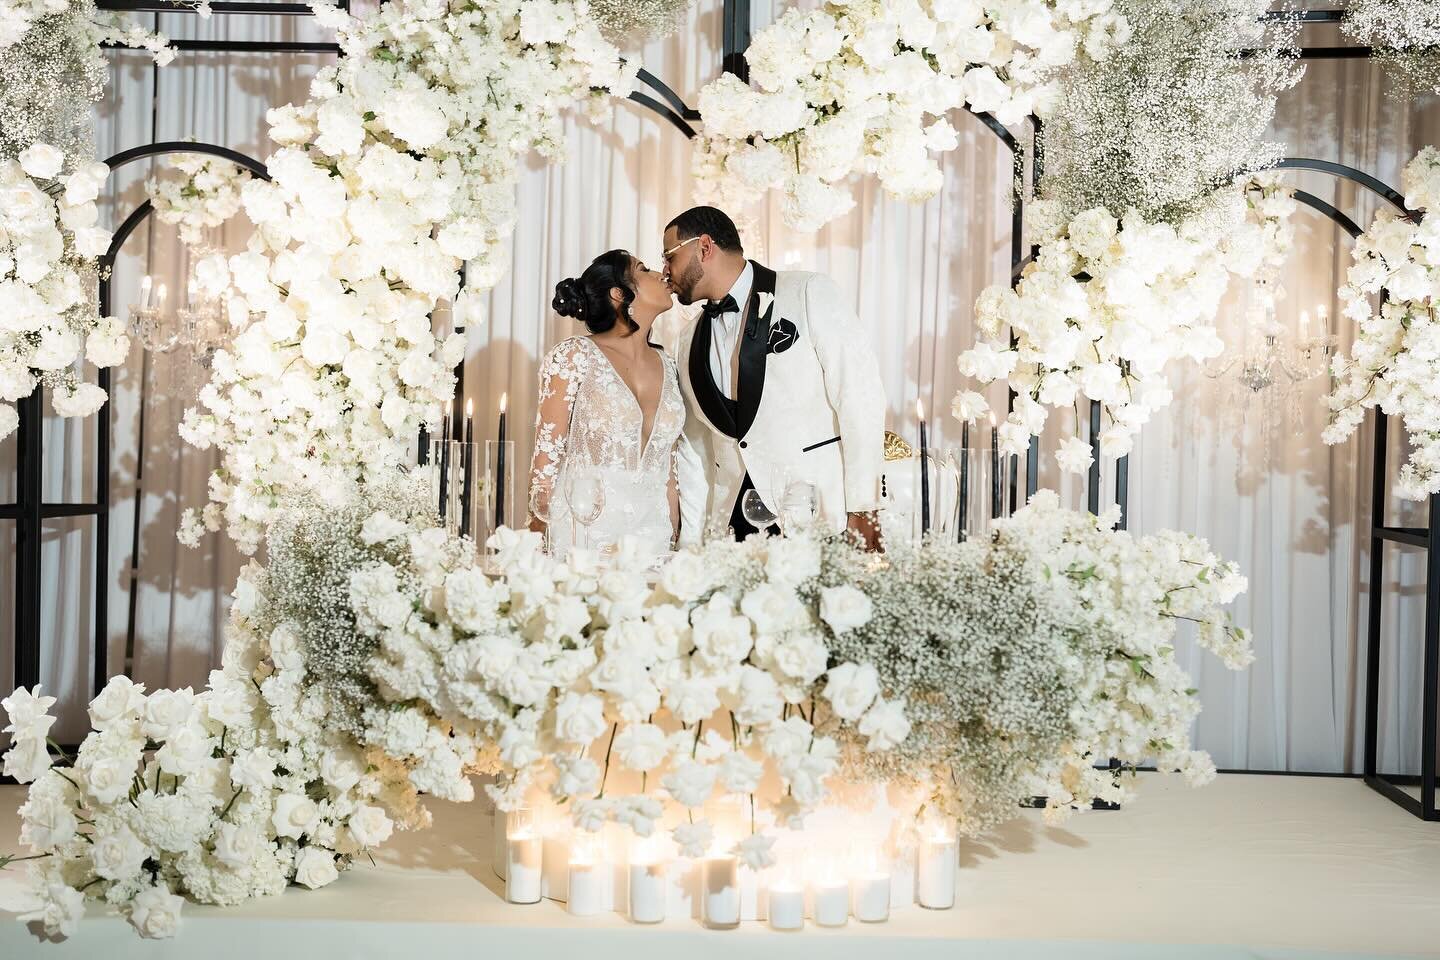 Clouds of baby&rsquo;s breath and white roses get a modern edge with pops of black. 🖤
#WeddedEvents 

Bride &amp; Groom @dottypop &amp; @shawn923_
Photography: @weddings_by_carlos
Wedding Venue: @crystalplaza
Flowers: @Weddedevents
Video: @Heatz